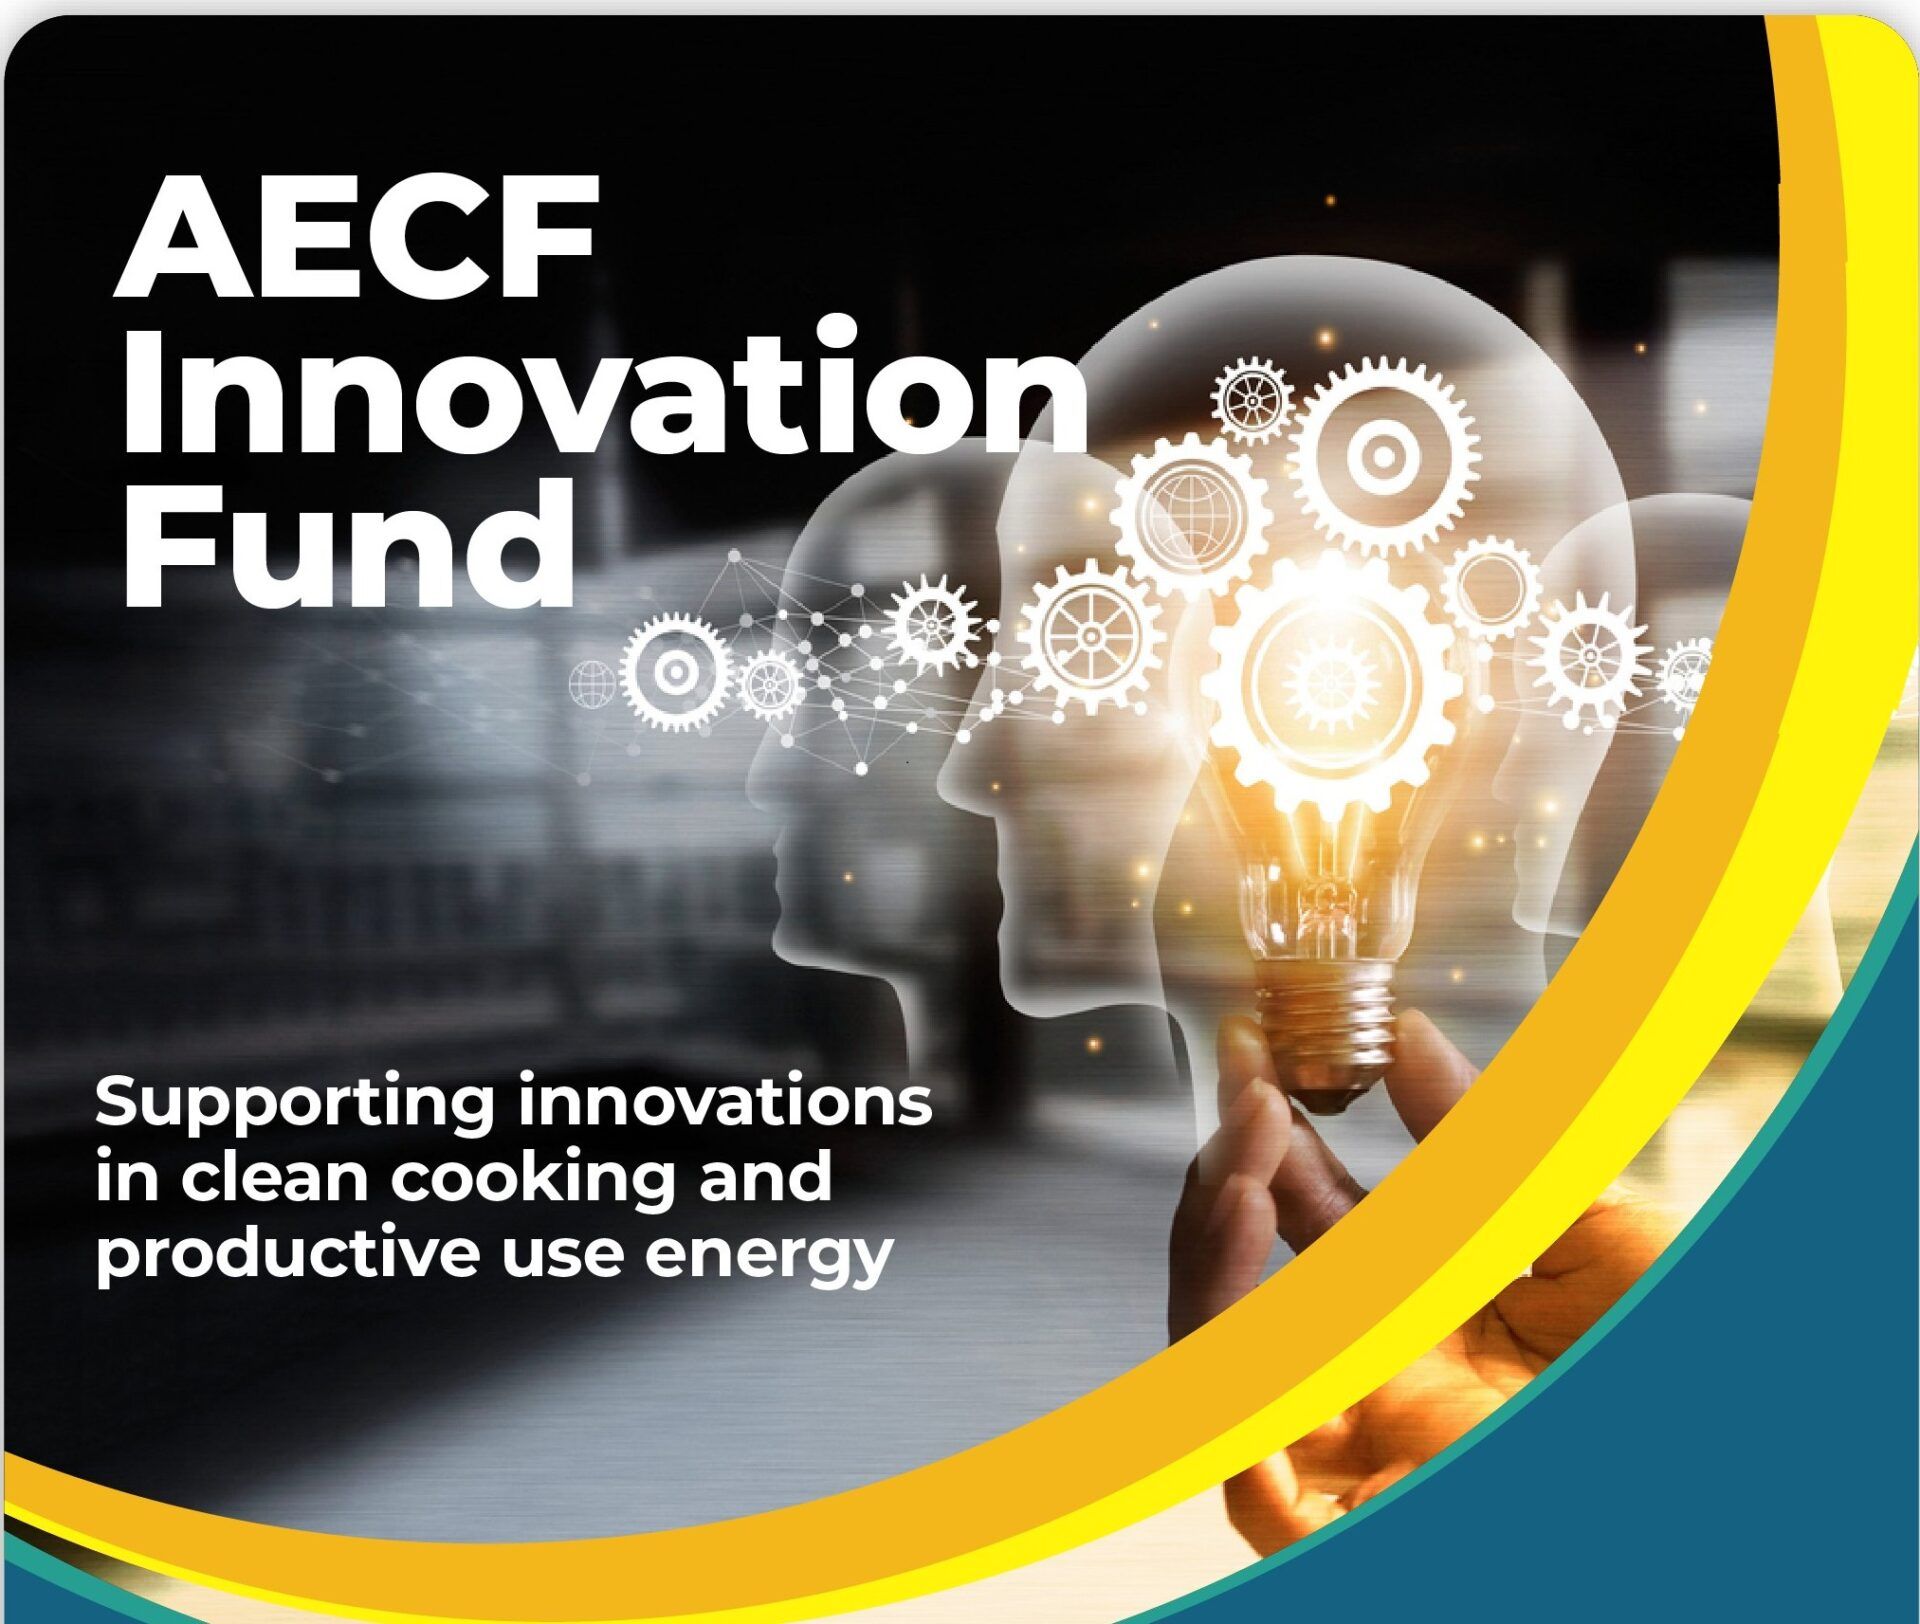 $1.2million Worth of Funding Launched by The African Enterprise Challenge Fund